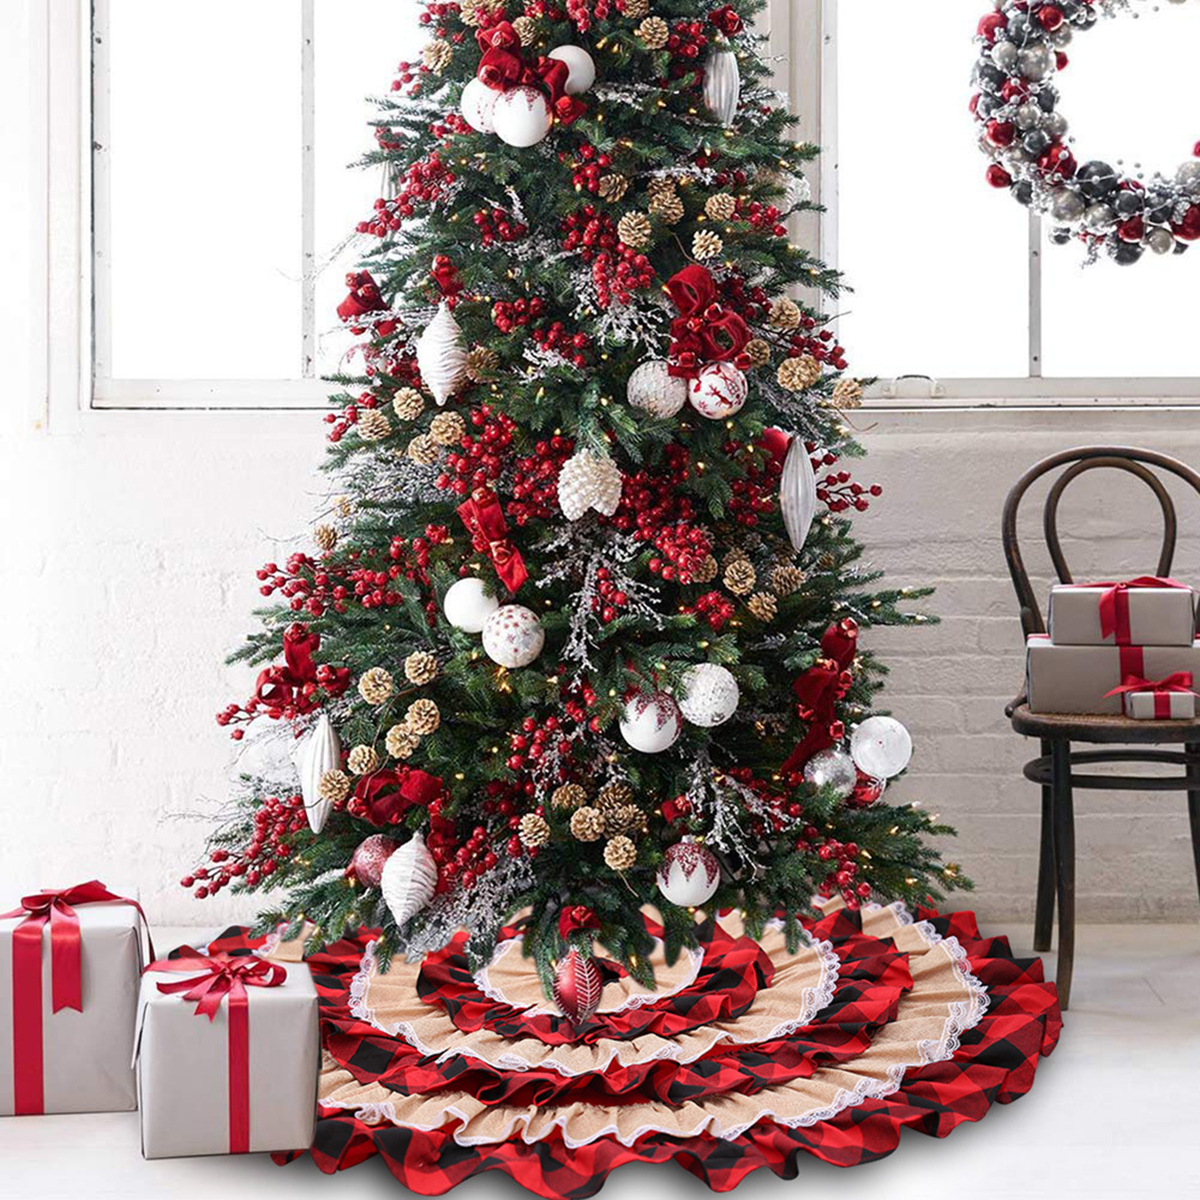 2020-Christmas-Tree-Skirts-Red-Cake-Plaid-Lace-Carpet-Round-Linen-Apron-New-Year-Blanket-Home-Partie-1770964-8